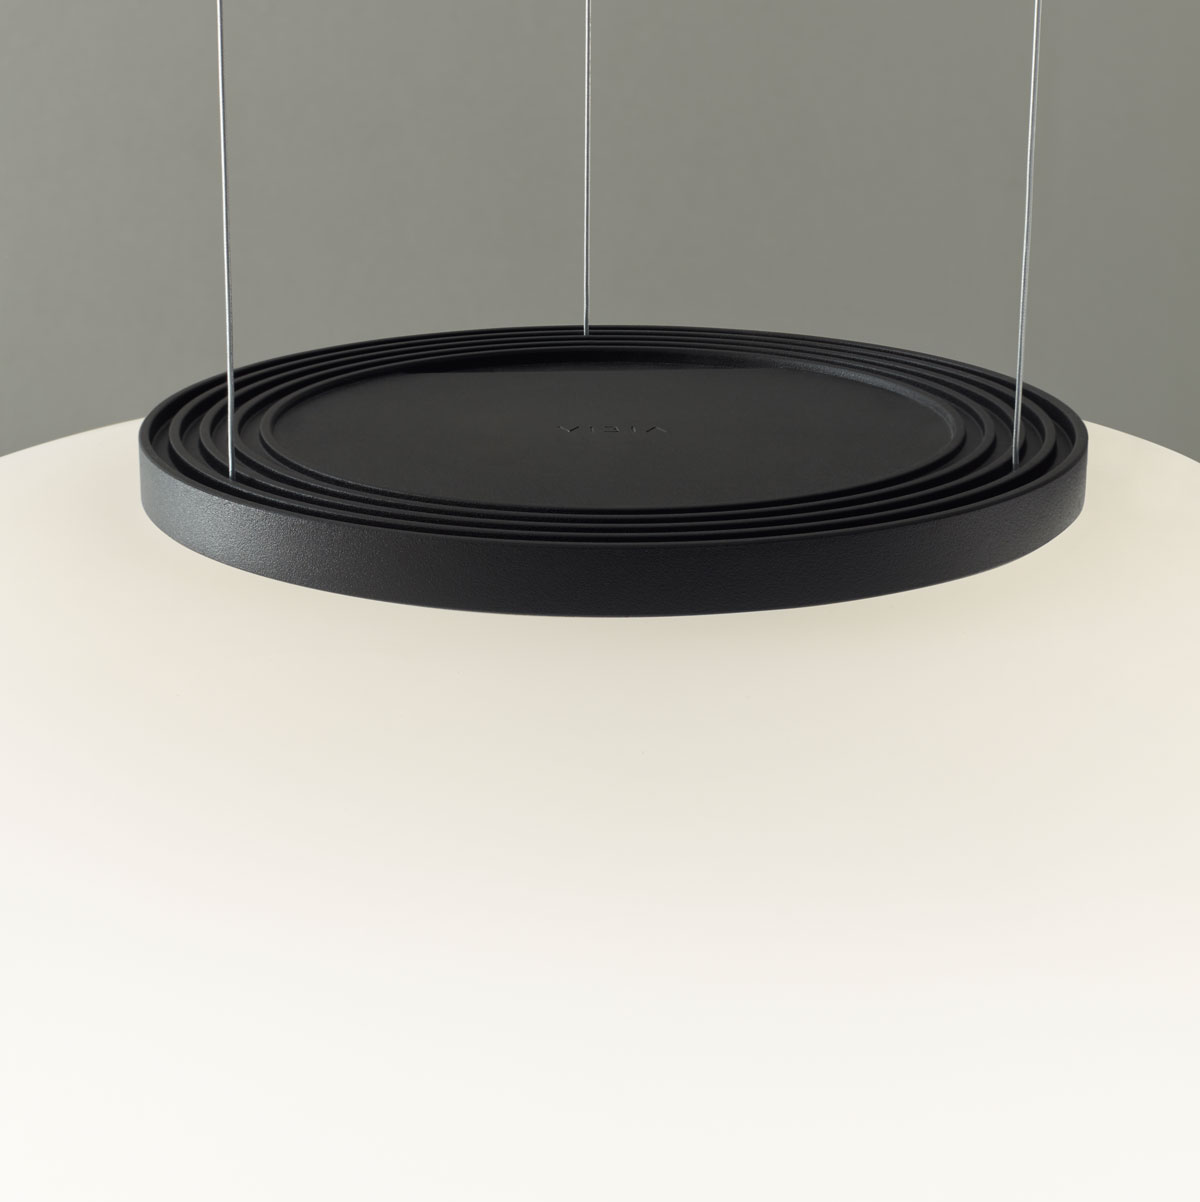 Vibia The Edit - Ghost: Craftsmanship and Cutting-Edge Technology